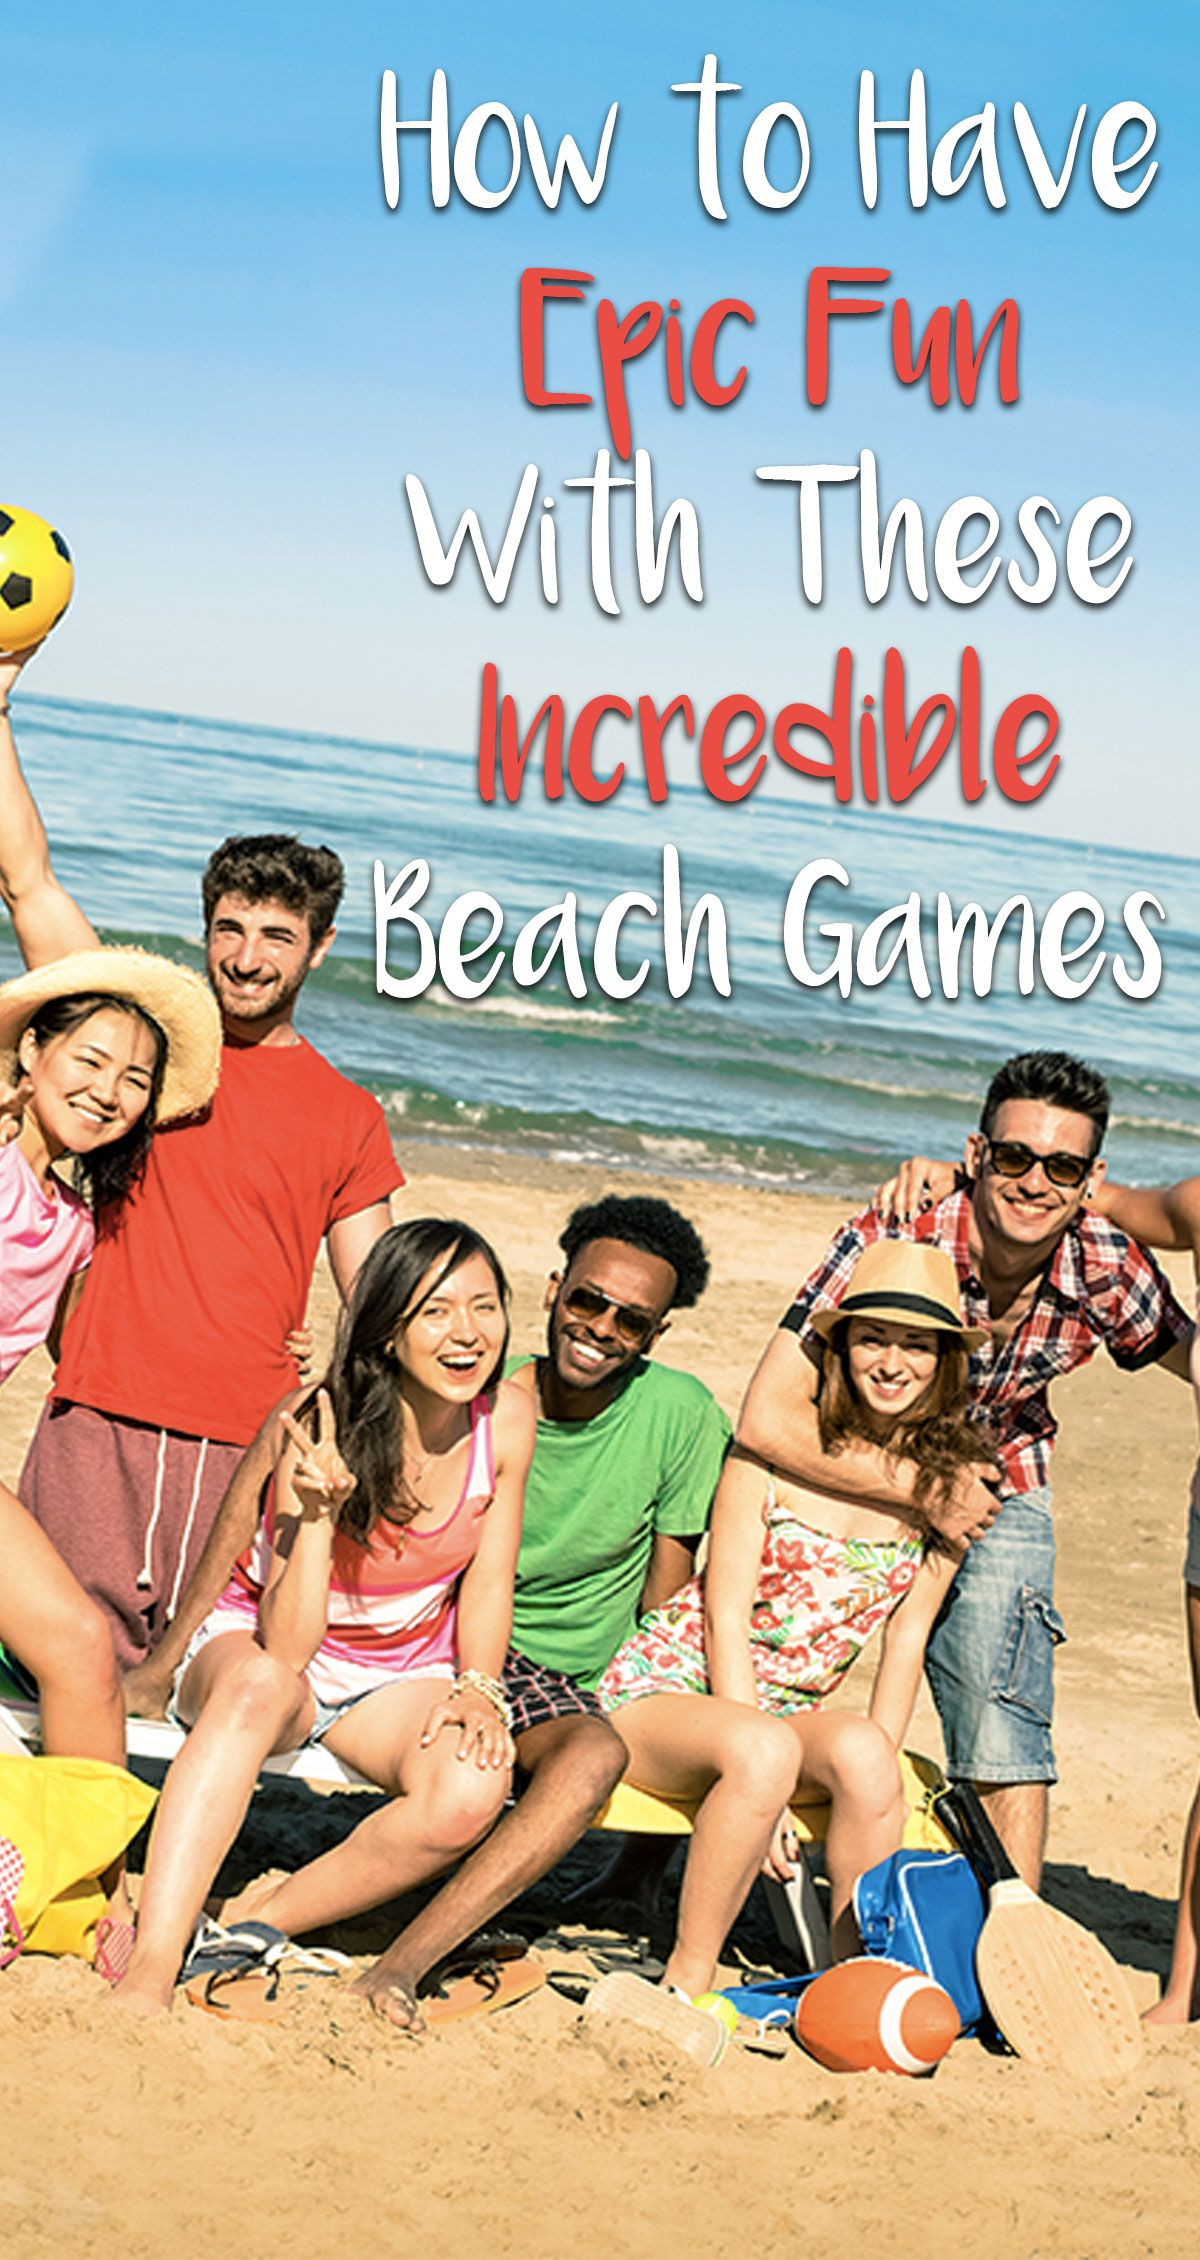 Beach Party Games For Adults Ideas
 How to Have Epic Fun With These Incredible Beach Games